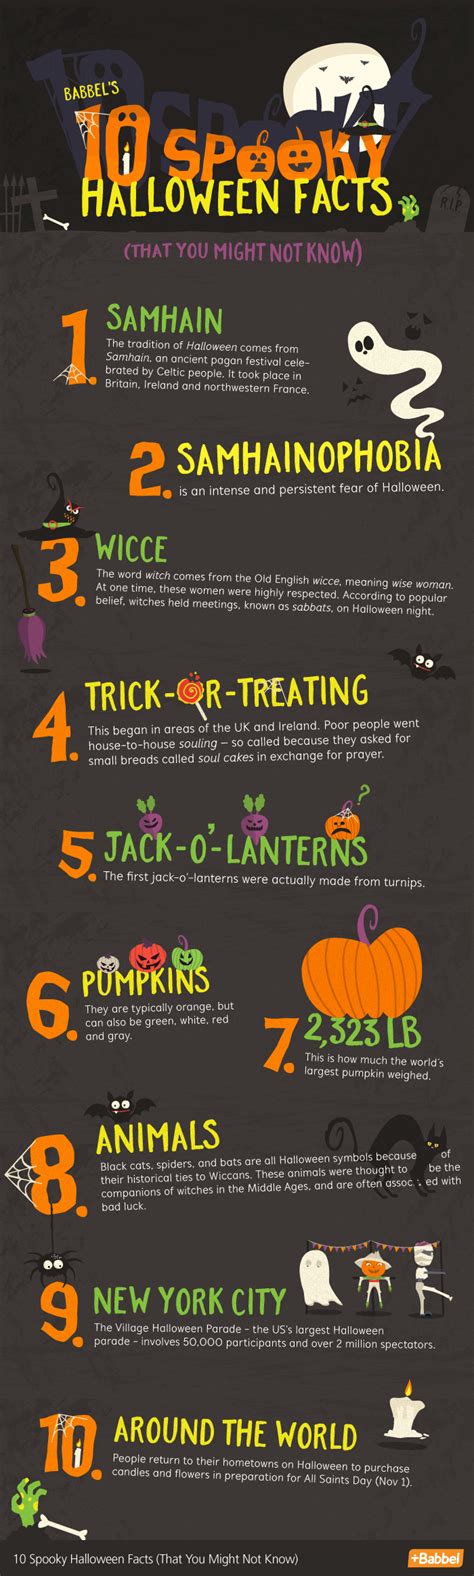 spooky halloween facts